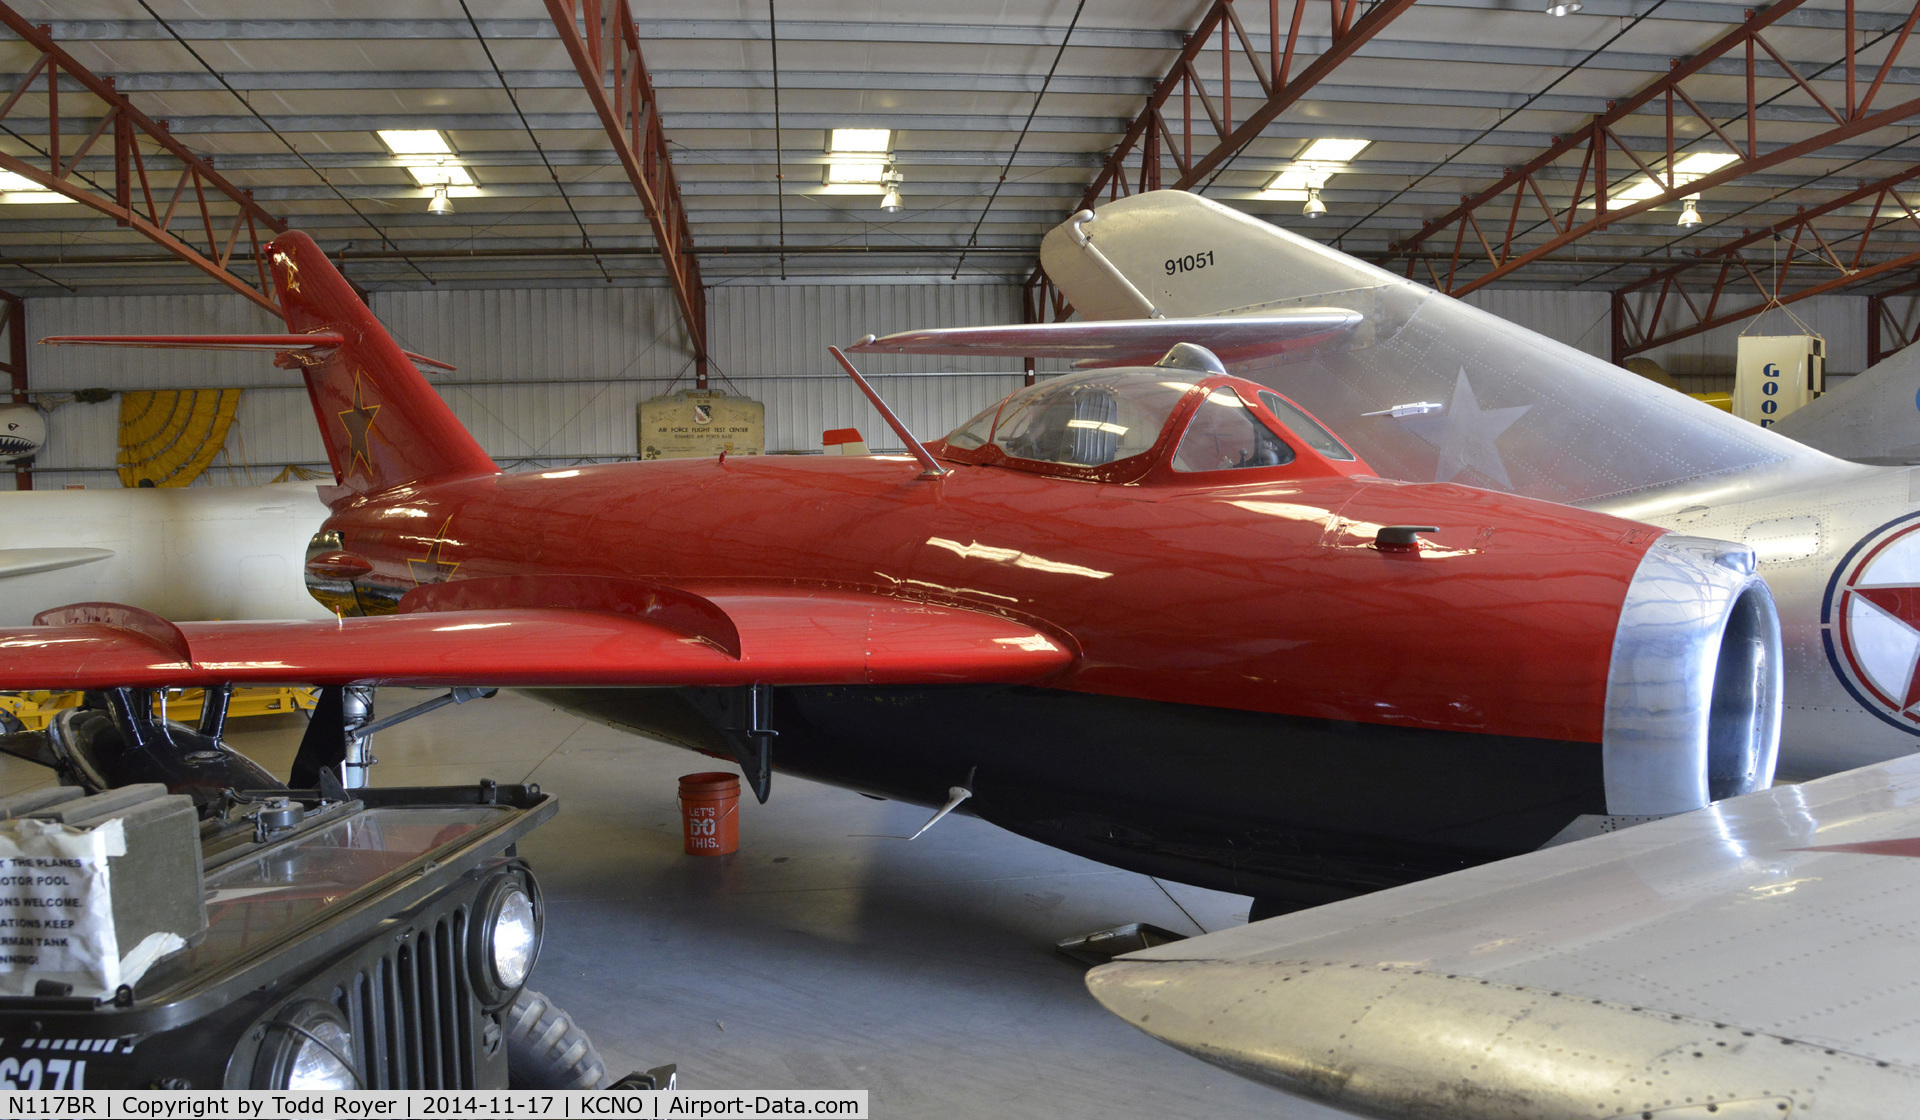 N117BR, 1959 PZL-Mielec Lim-5 (MiG-17F) C/N 1C1529, On display at the Planes of Fame Chino location